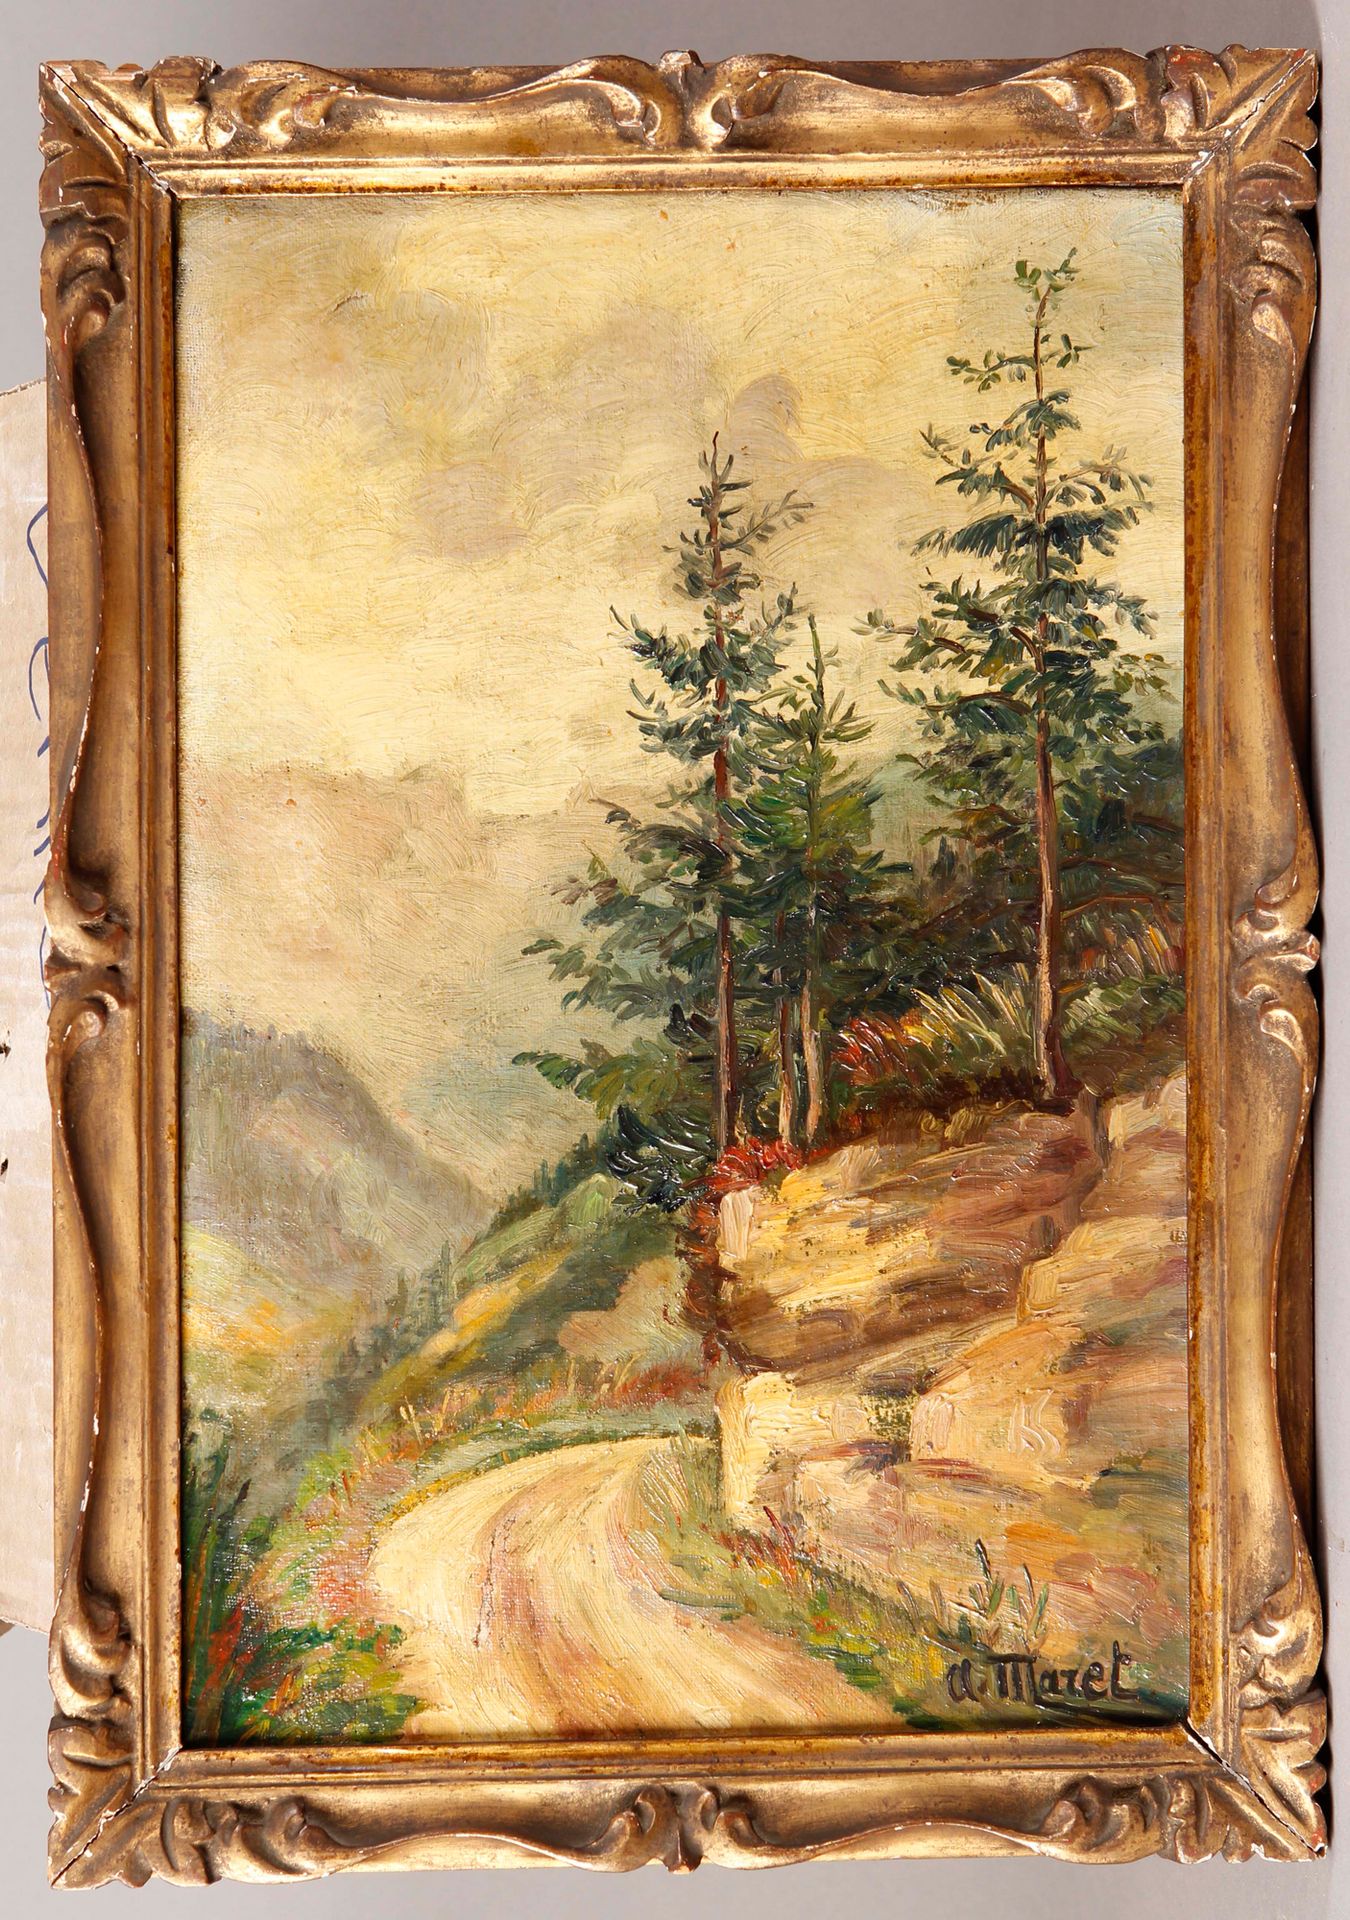 Null A.MARET (XXth century)

Way of the Mountain

Oil on canvas.

41 x 27,5 cm

&hellip;